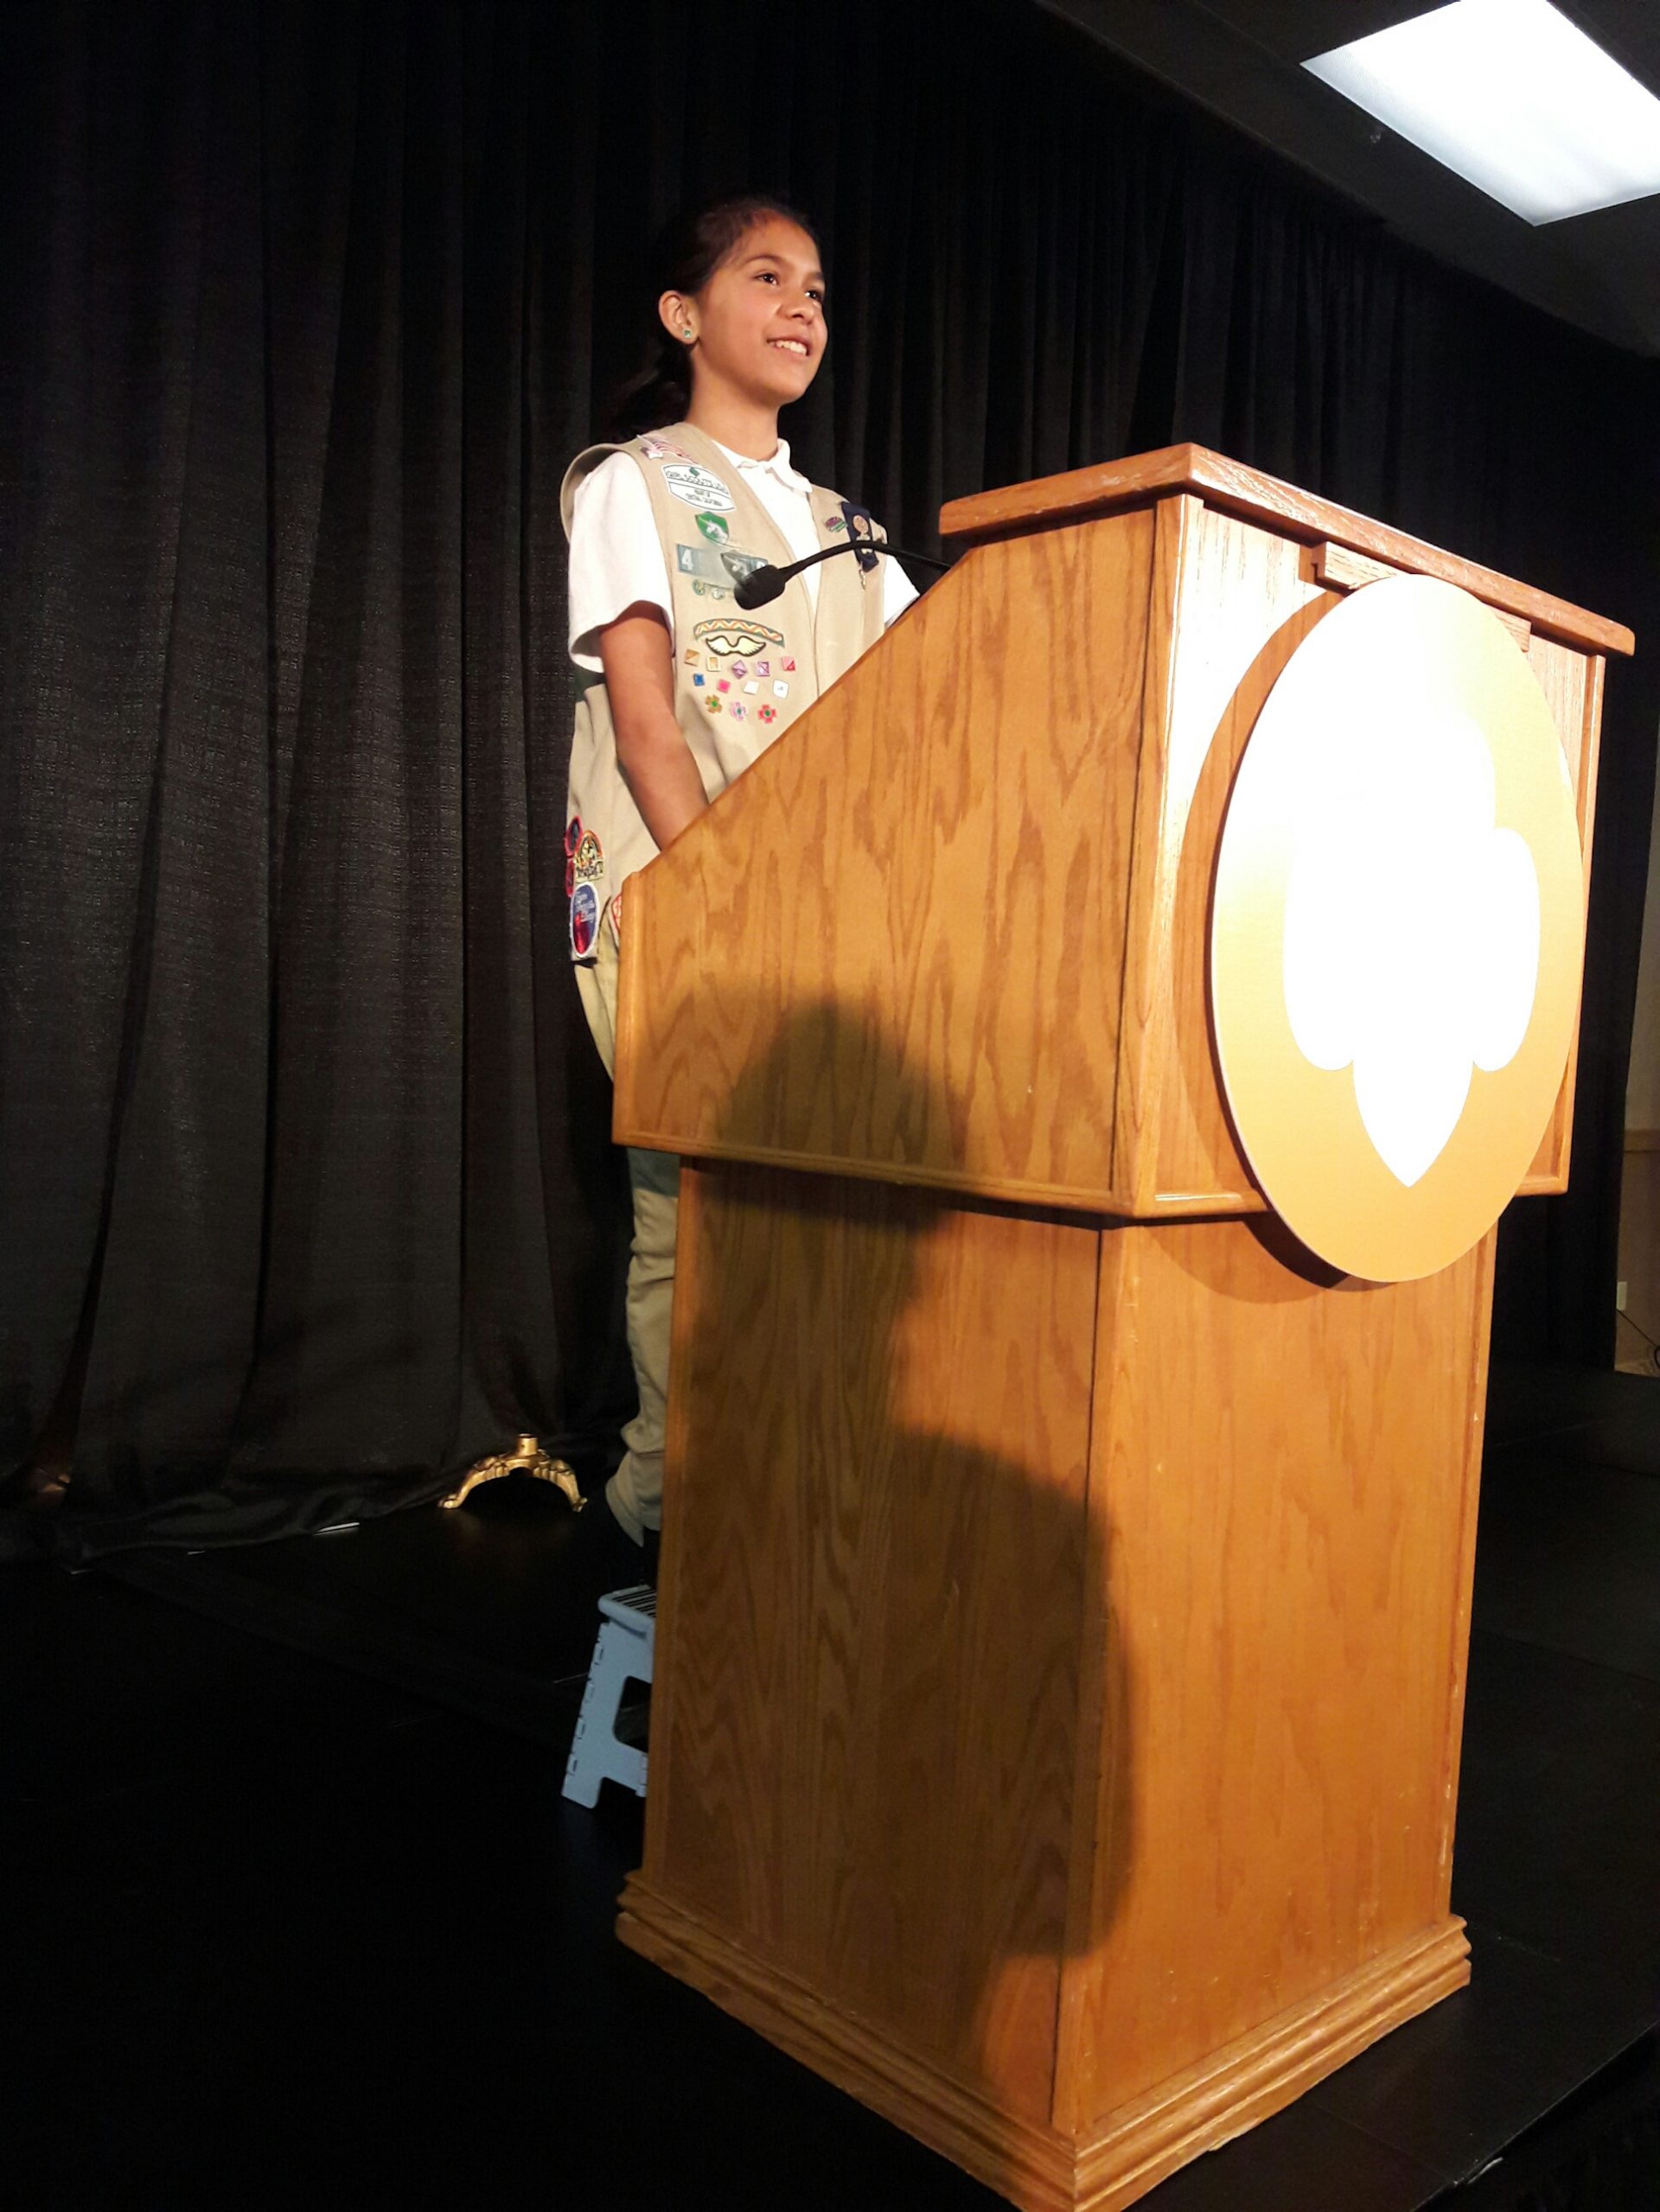 Taylor speaks at the podium about bullying and how Girl Scouts inspired her to be brave during Girl Scouts Heart of Central California's annual meeting in Sacramento.